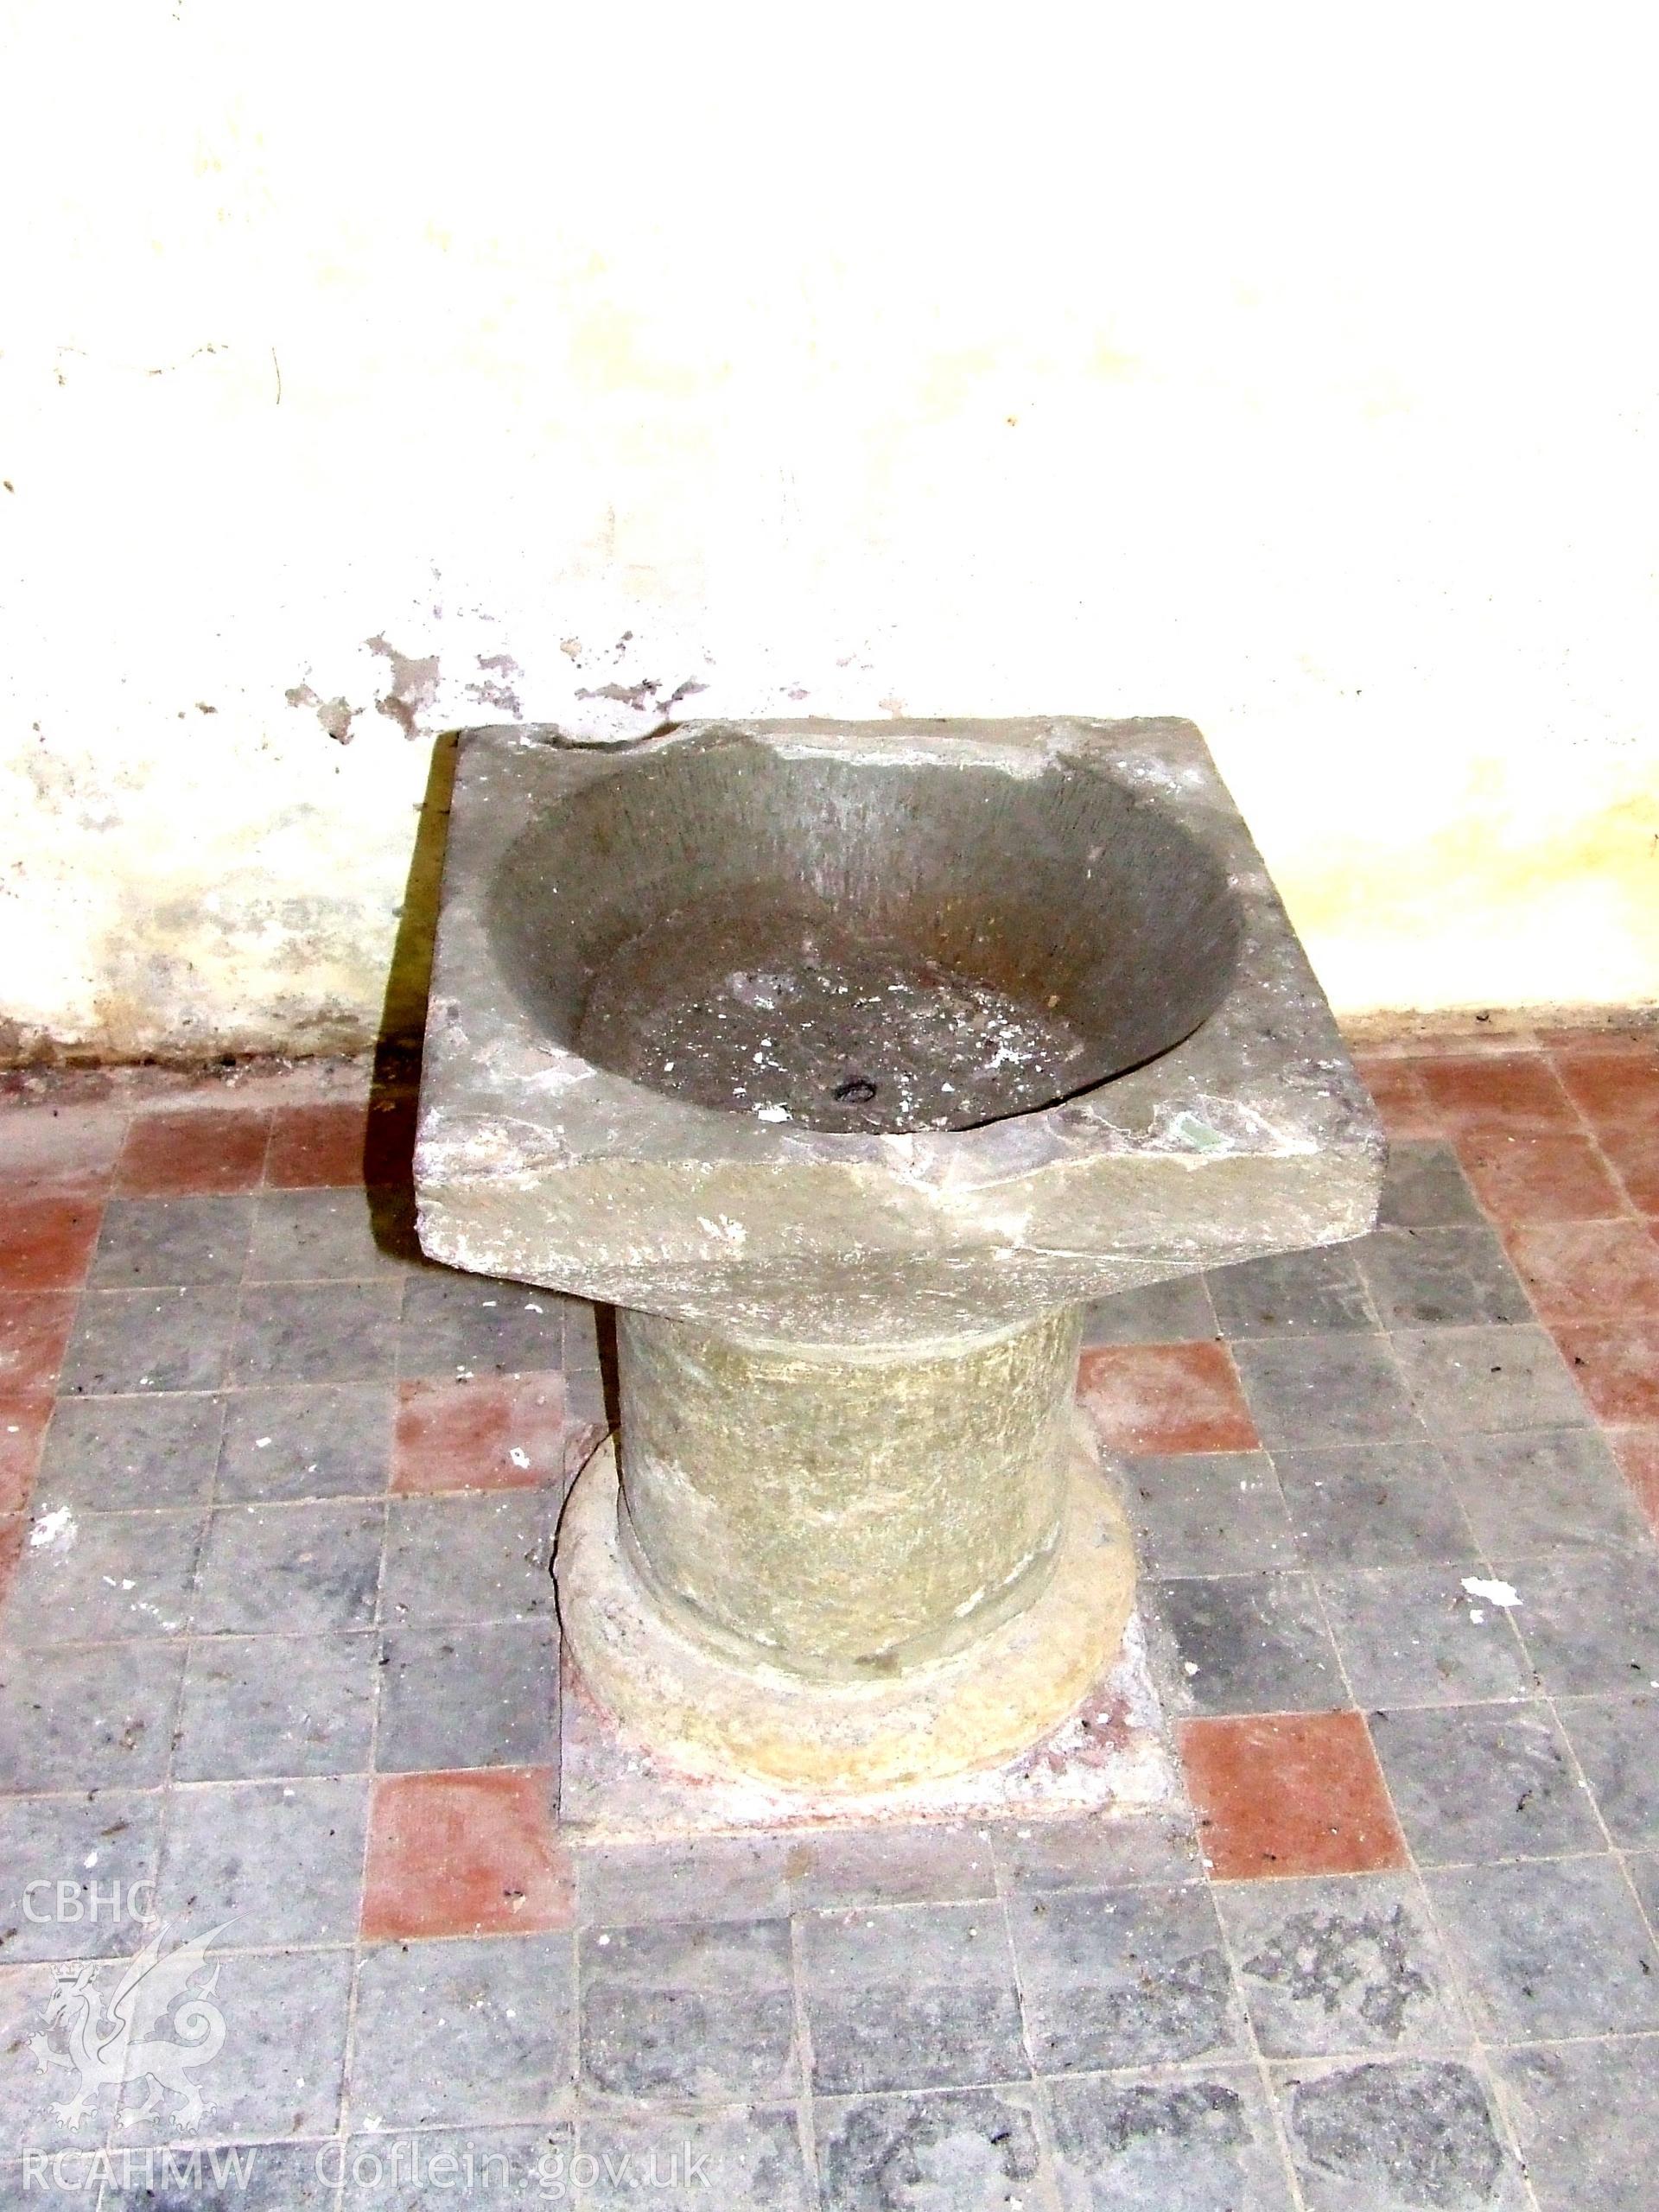 Digital colour photograph showing the font at St Justinian's Church, Llanstinian. Produced by Martin Davies in 2022.